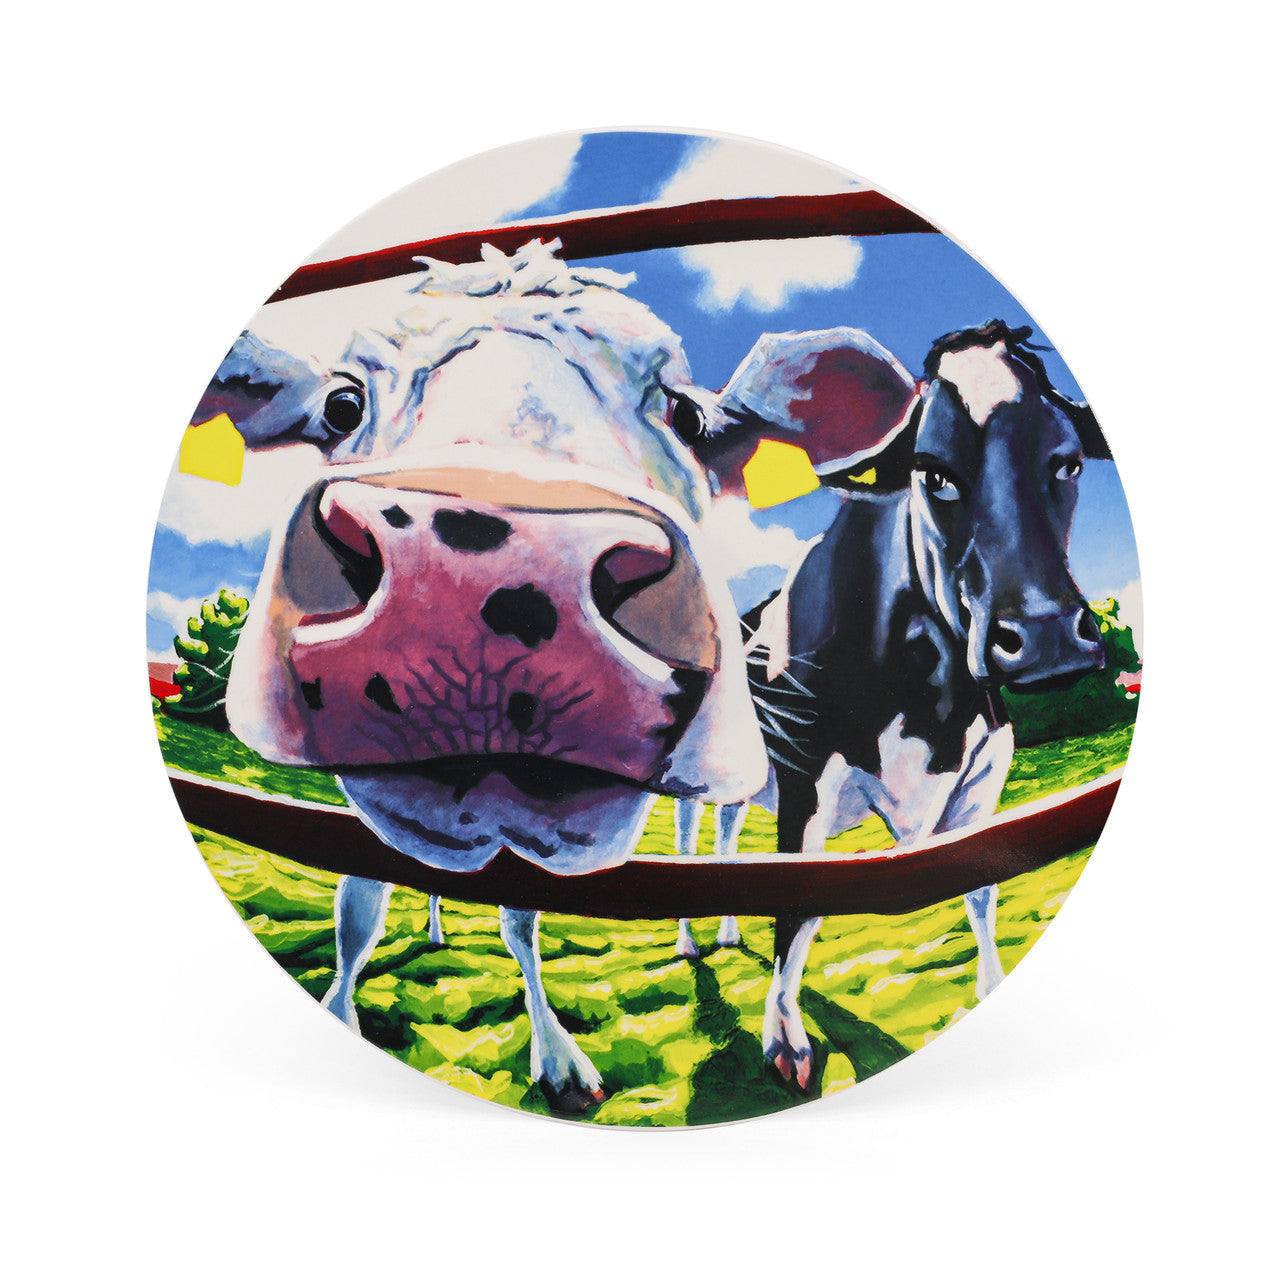 Tipperary Crystal Eoin O'Connor Cow Cake Stand - NEW 2022  EOIN O’CONNOR’S eclectic style and striking use of colour makes his work instantly recognisable. While his command over scale and perspective is rooted in his architectural training.